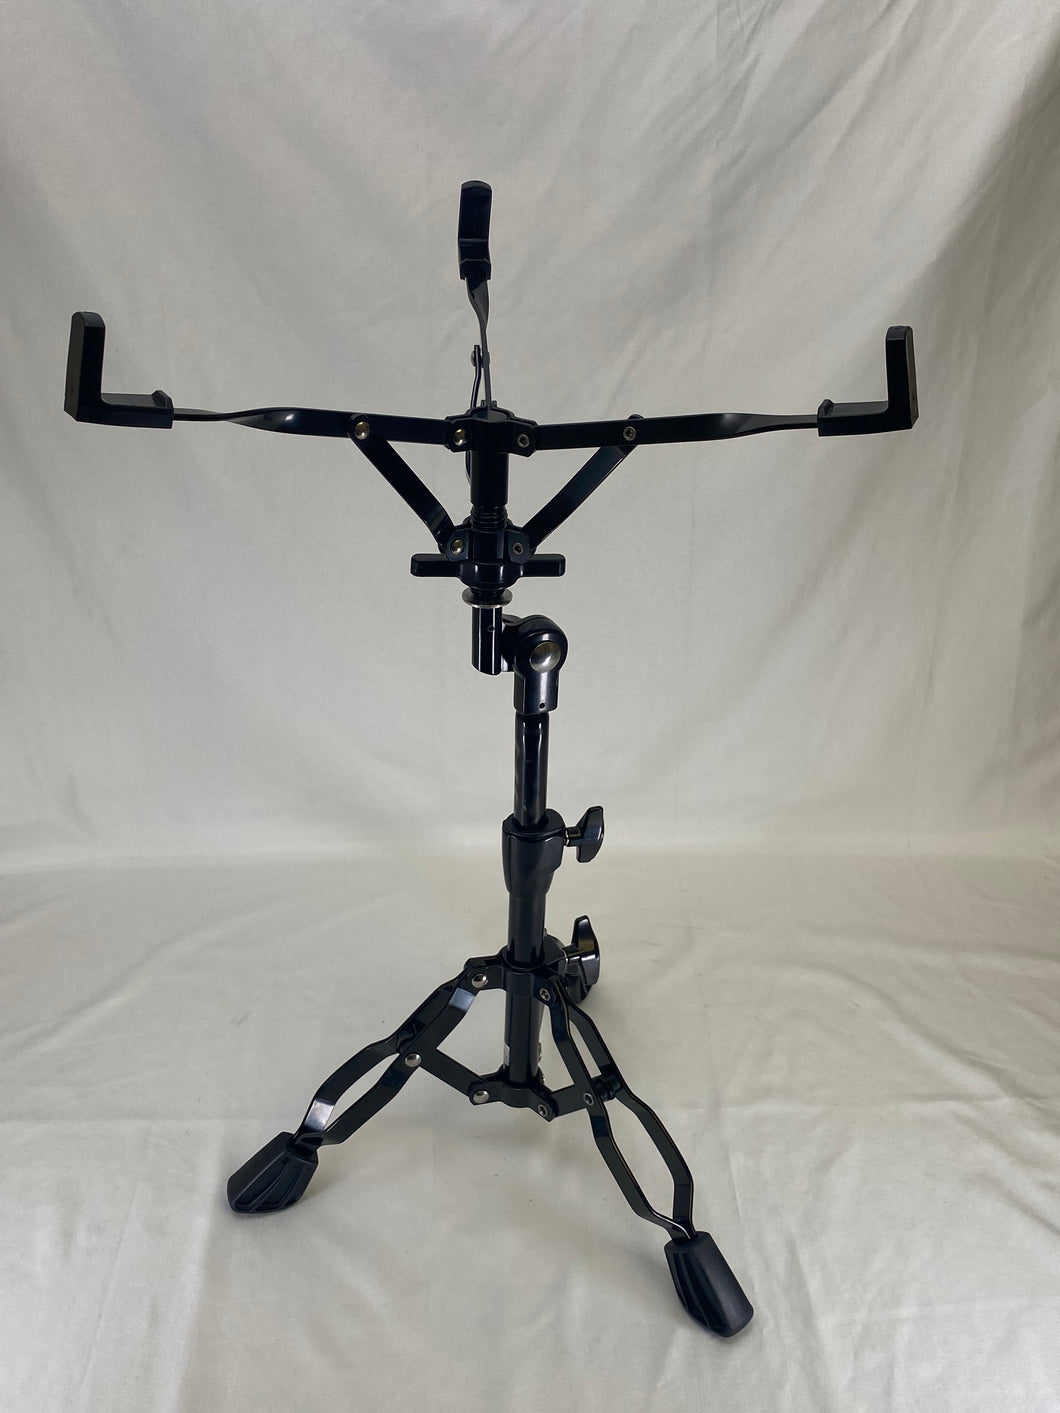 Mapex S400 Double Braced Ratchet Adjuster Snare Stand - Used Very Good - #U0001